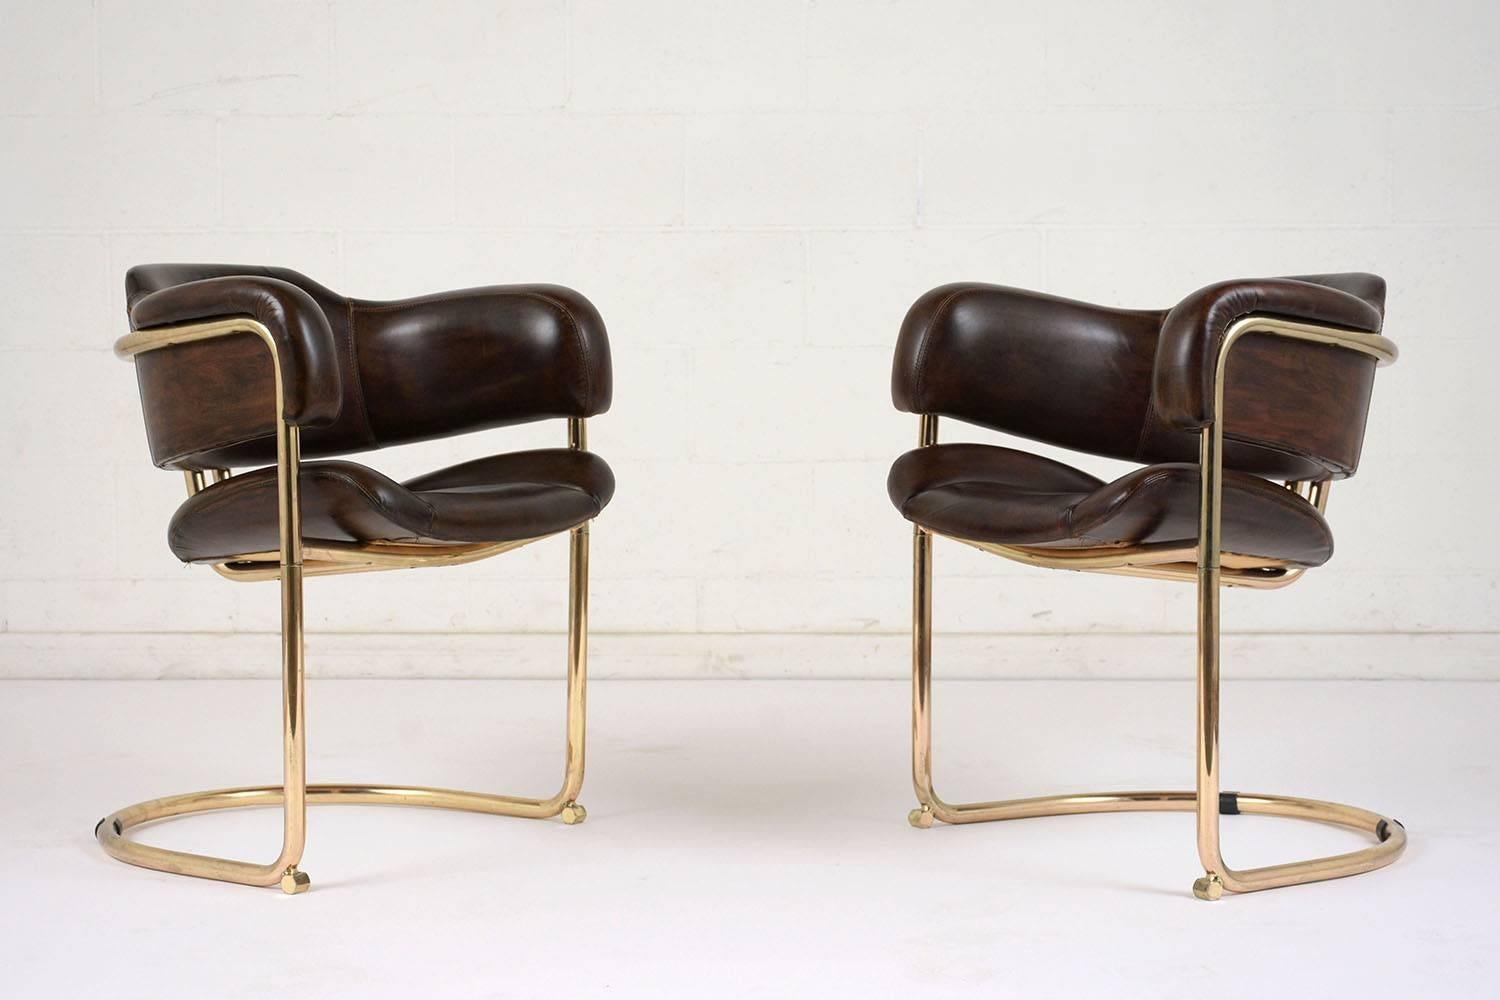 This pair of 1960s Mid-Century Modern-style armchairs features brass frames and comfortable leather seats. The brass frames have a floating seat with a curved back and supports. The seats are upholstered in leather dyed a deep brown color with